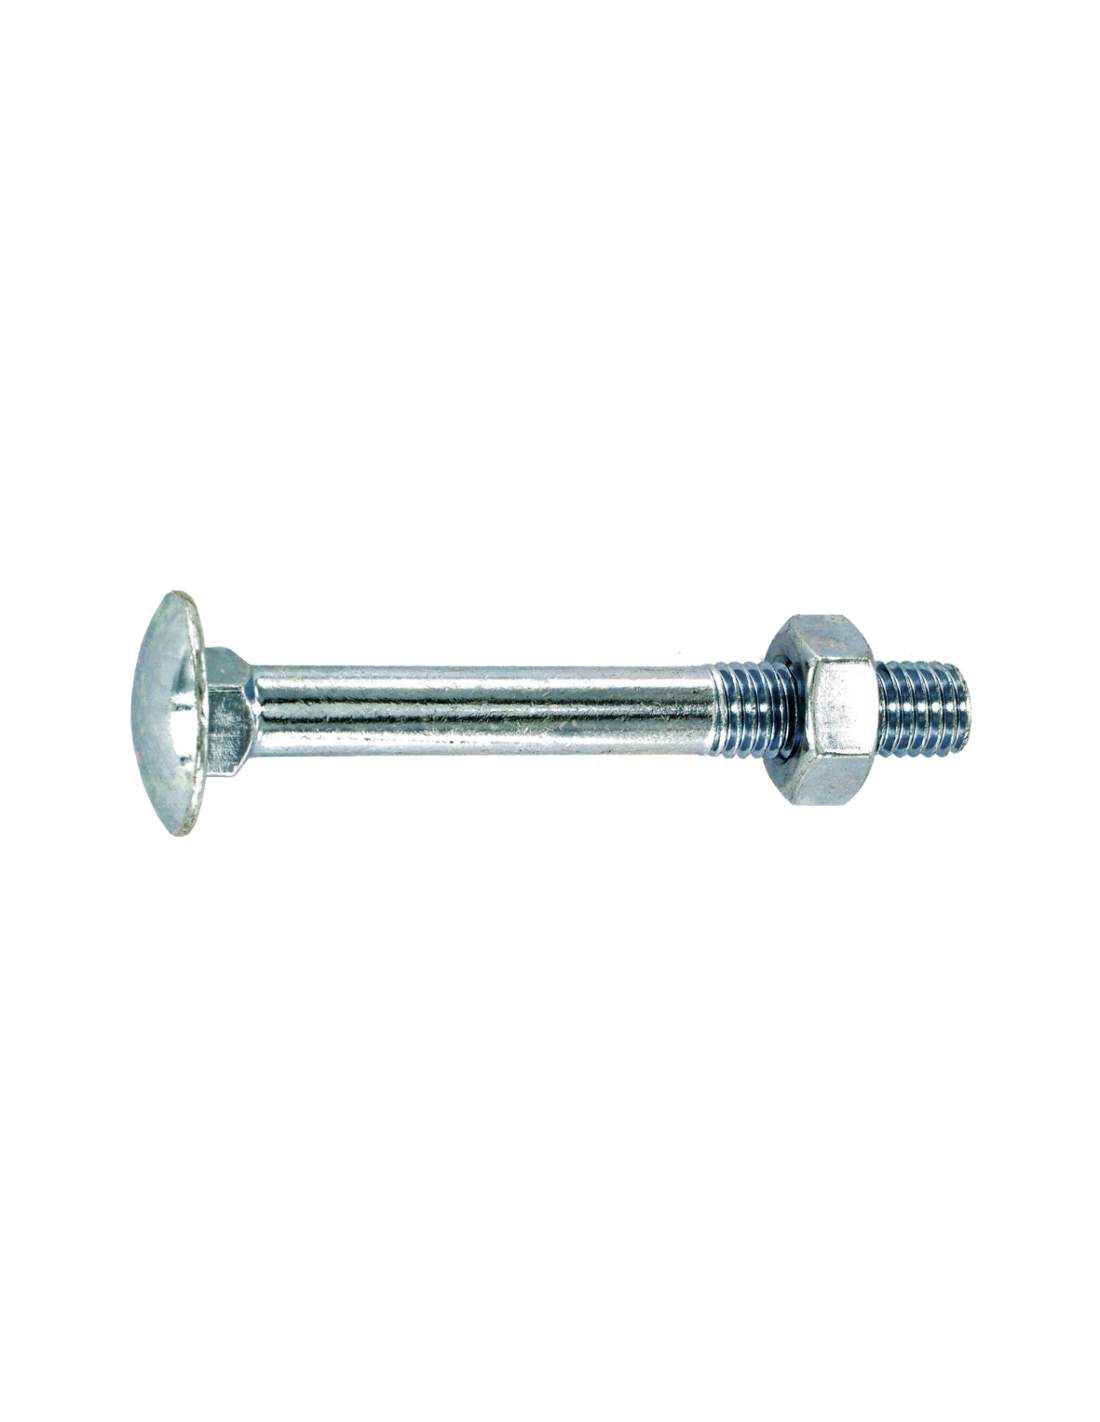 Zinc-plated steel round-head bolt with square collar 8x80mm, 3 pcs.